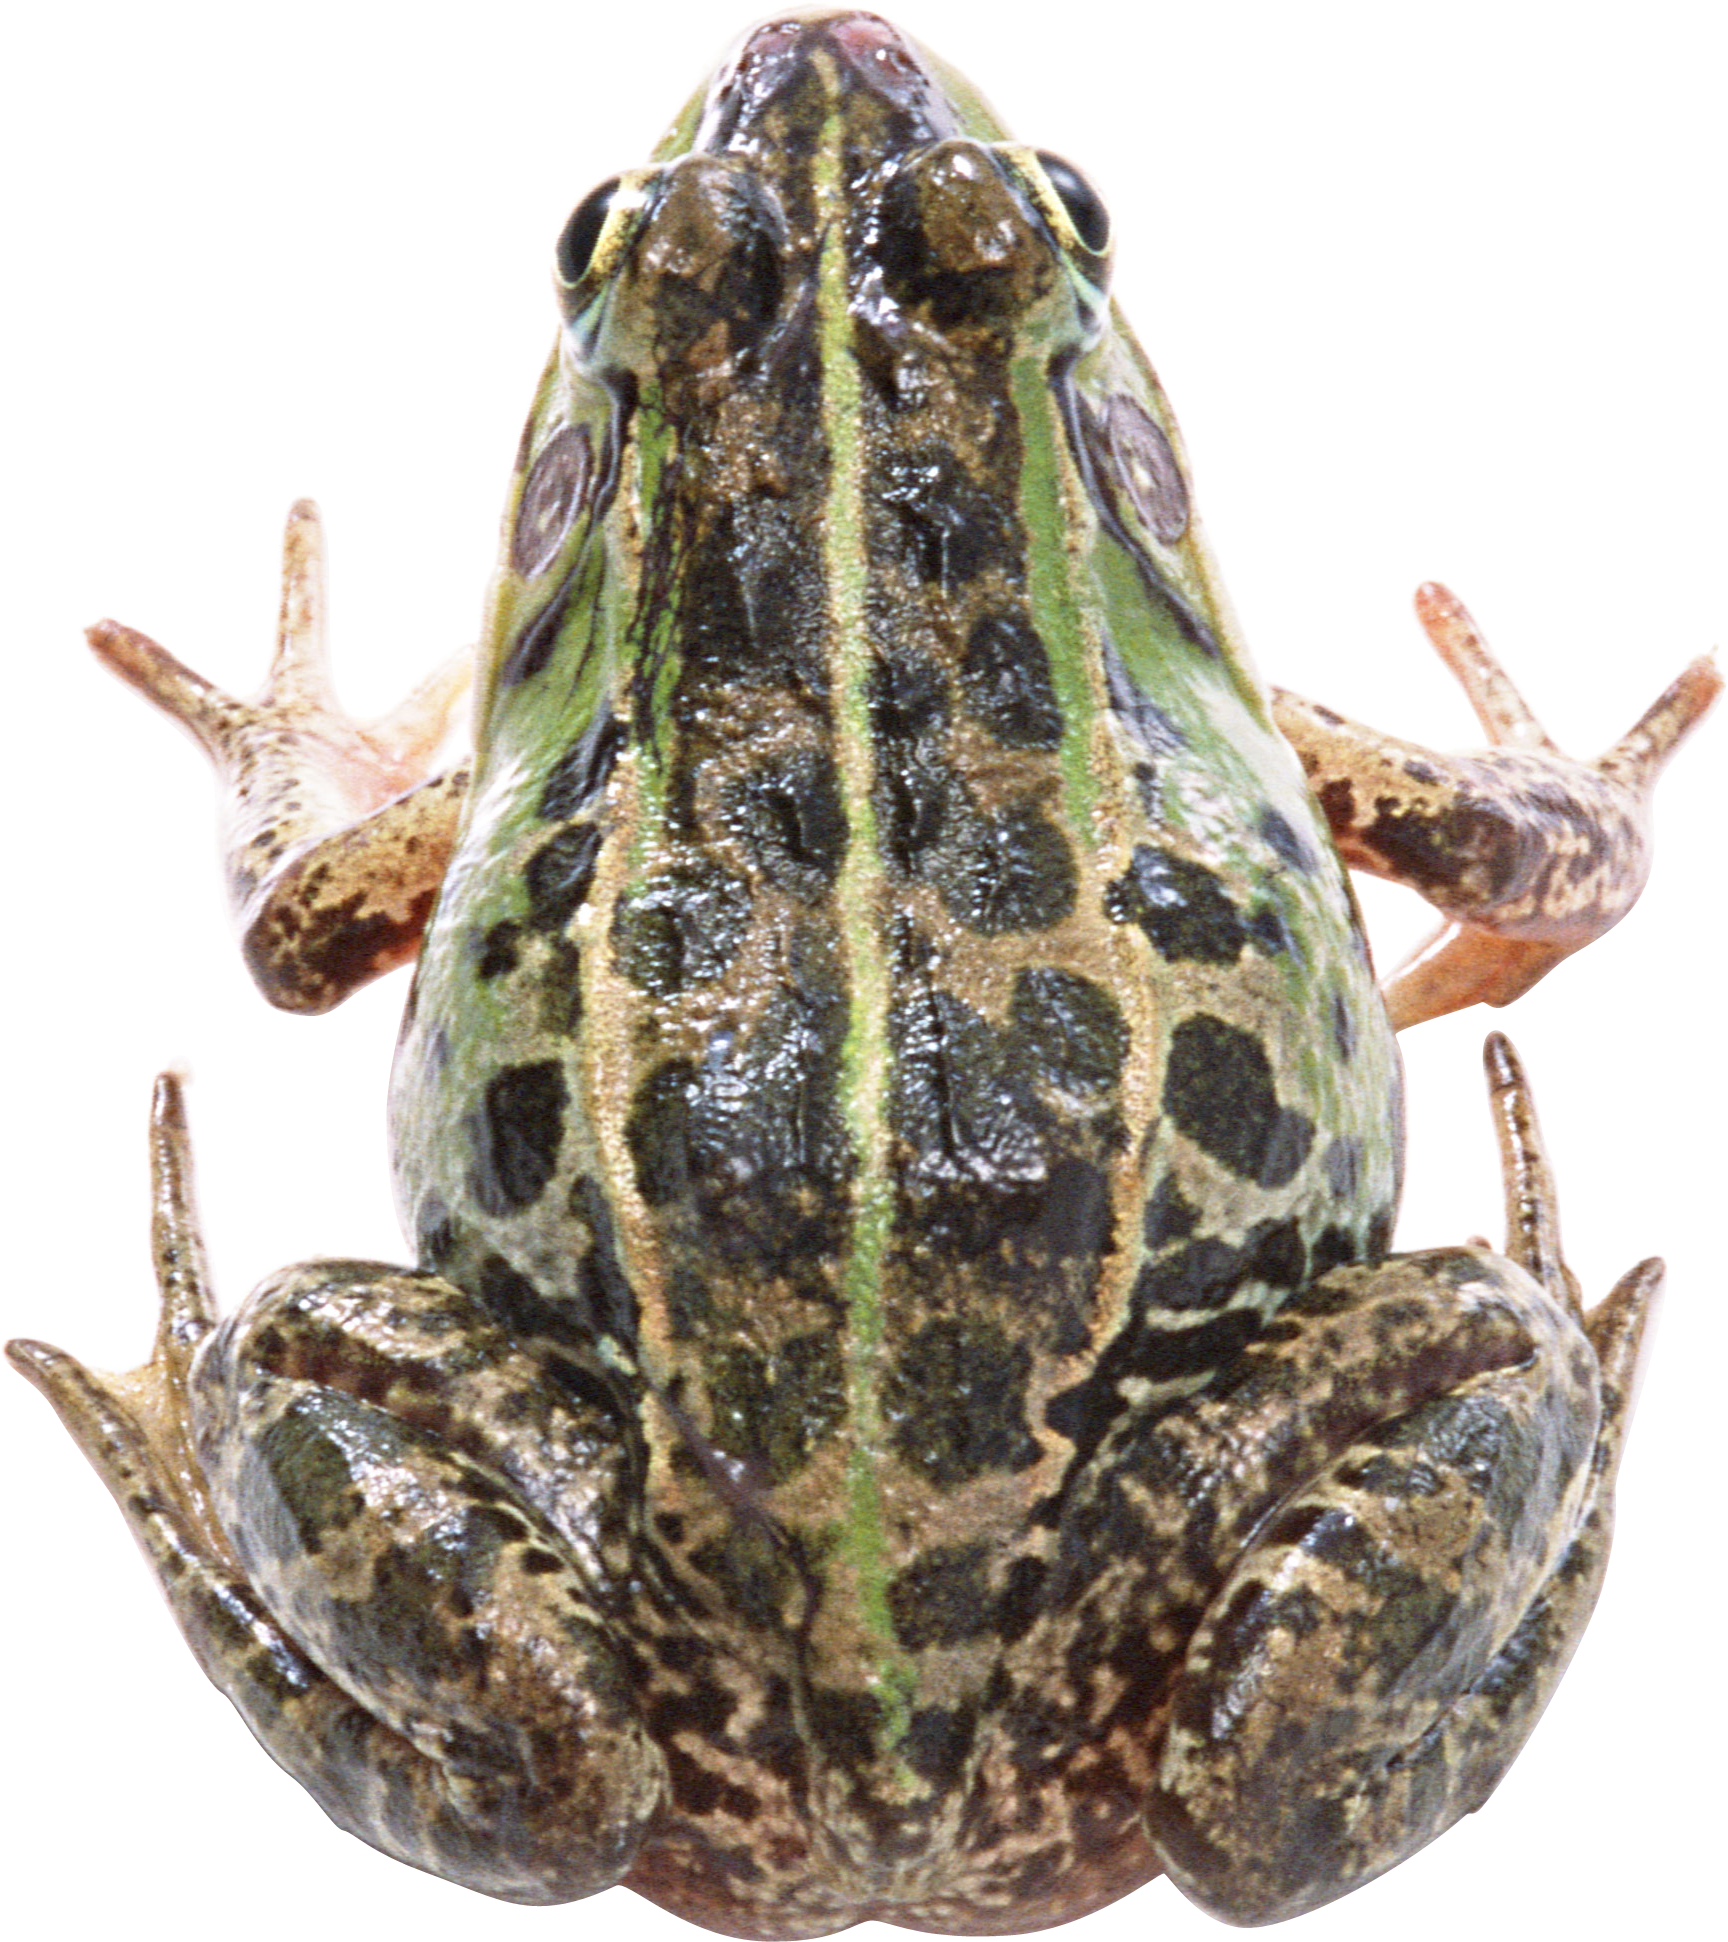 Png image free download. Toad clipart group frog